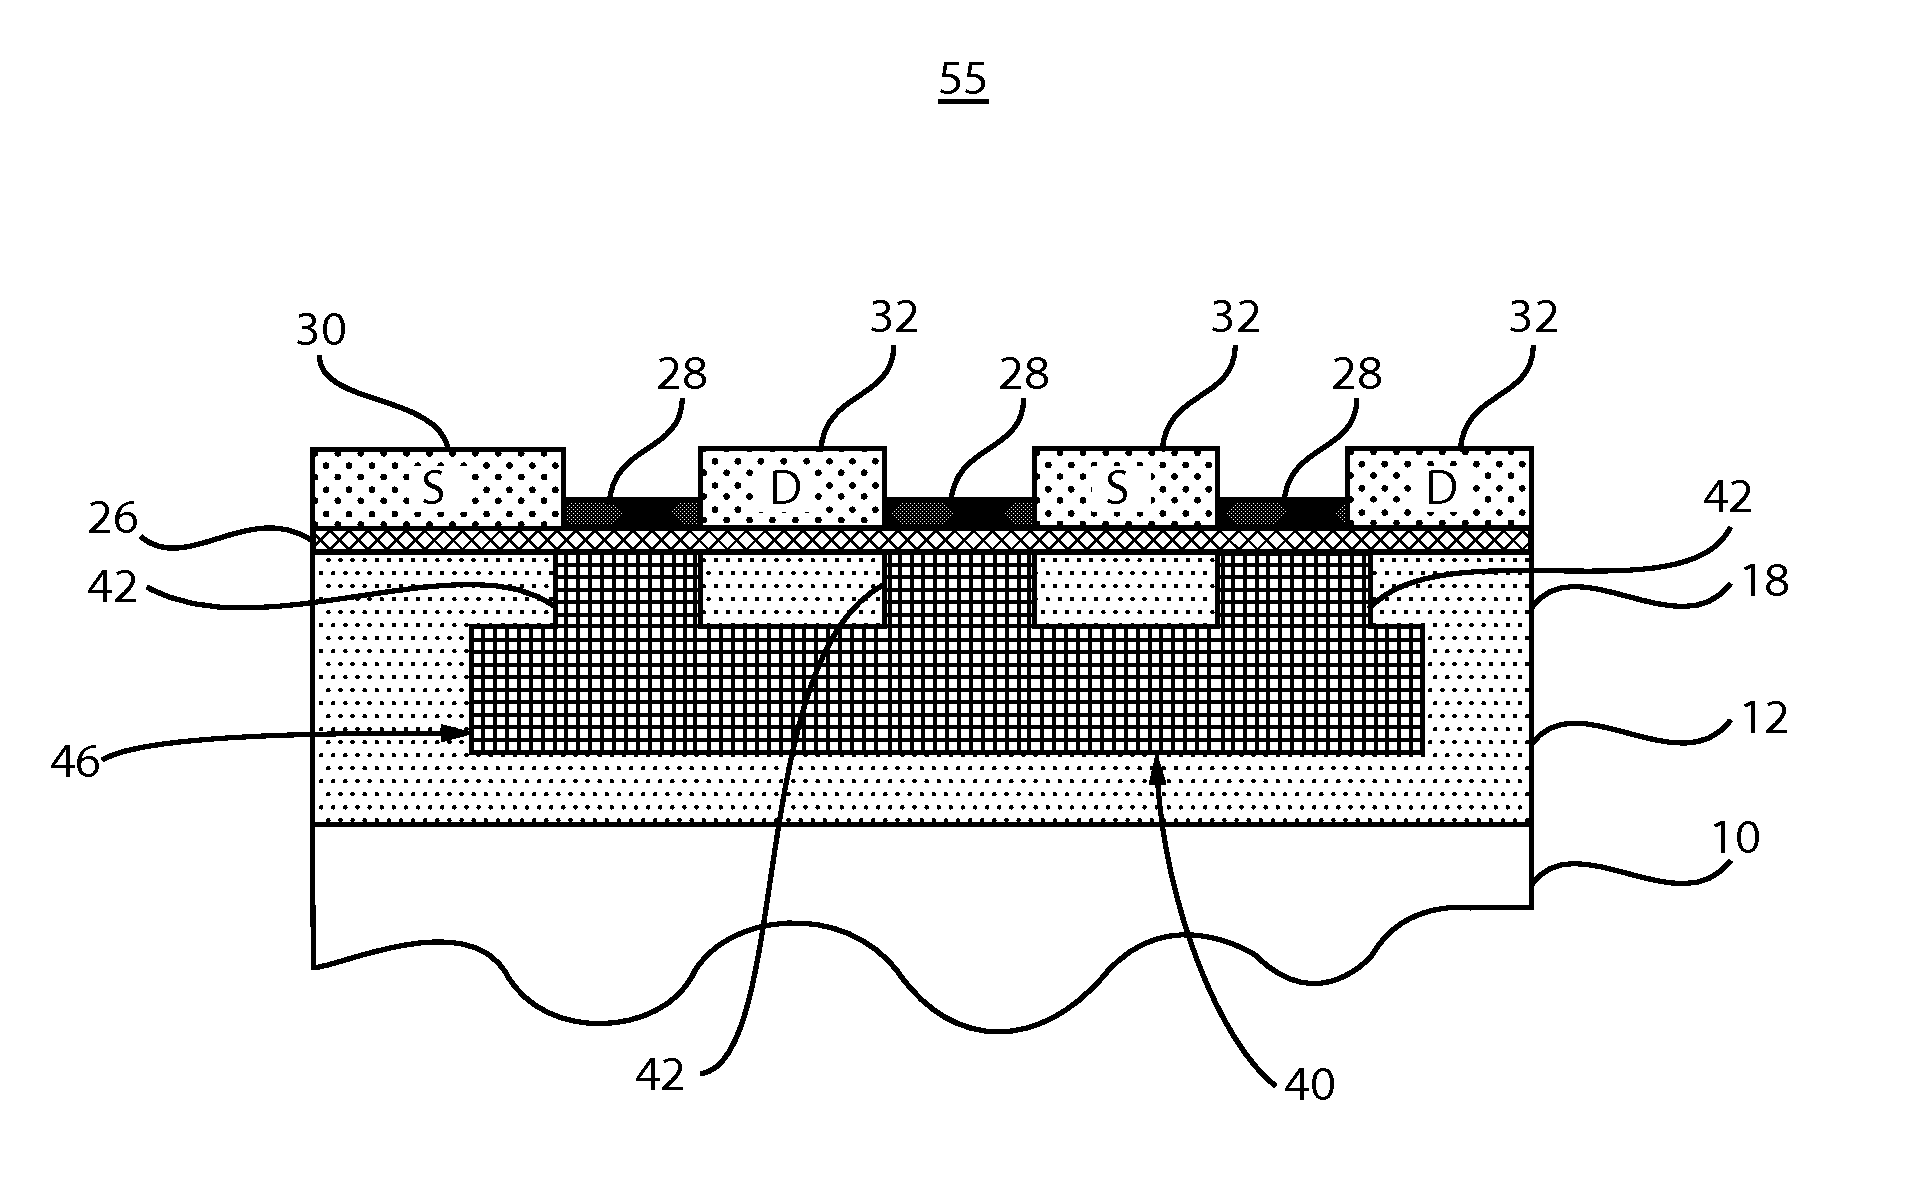 Transistor device with reduced gate resistance